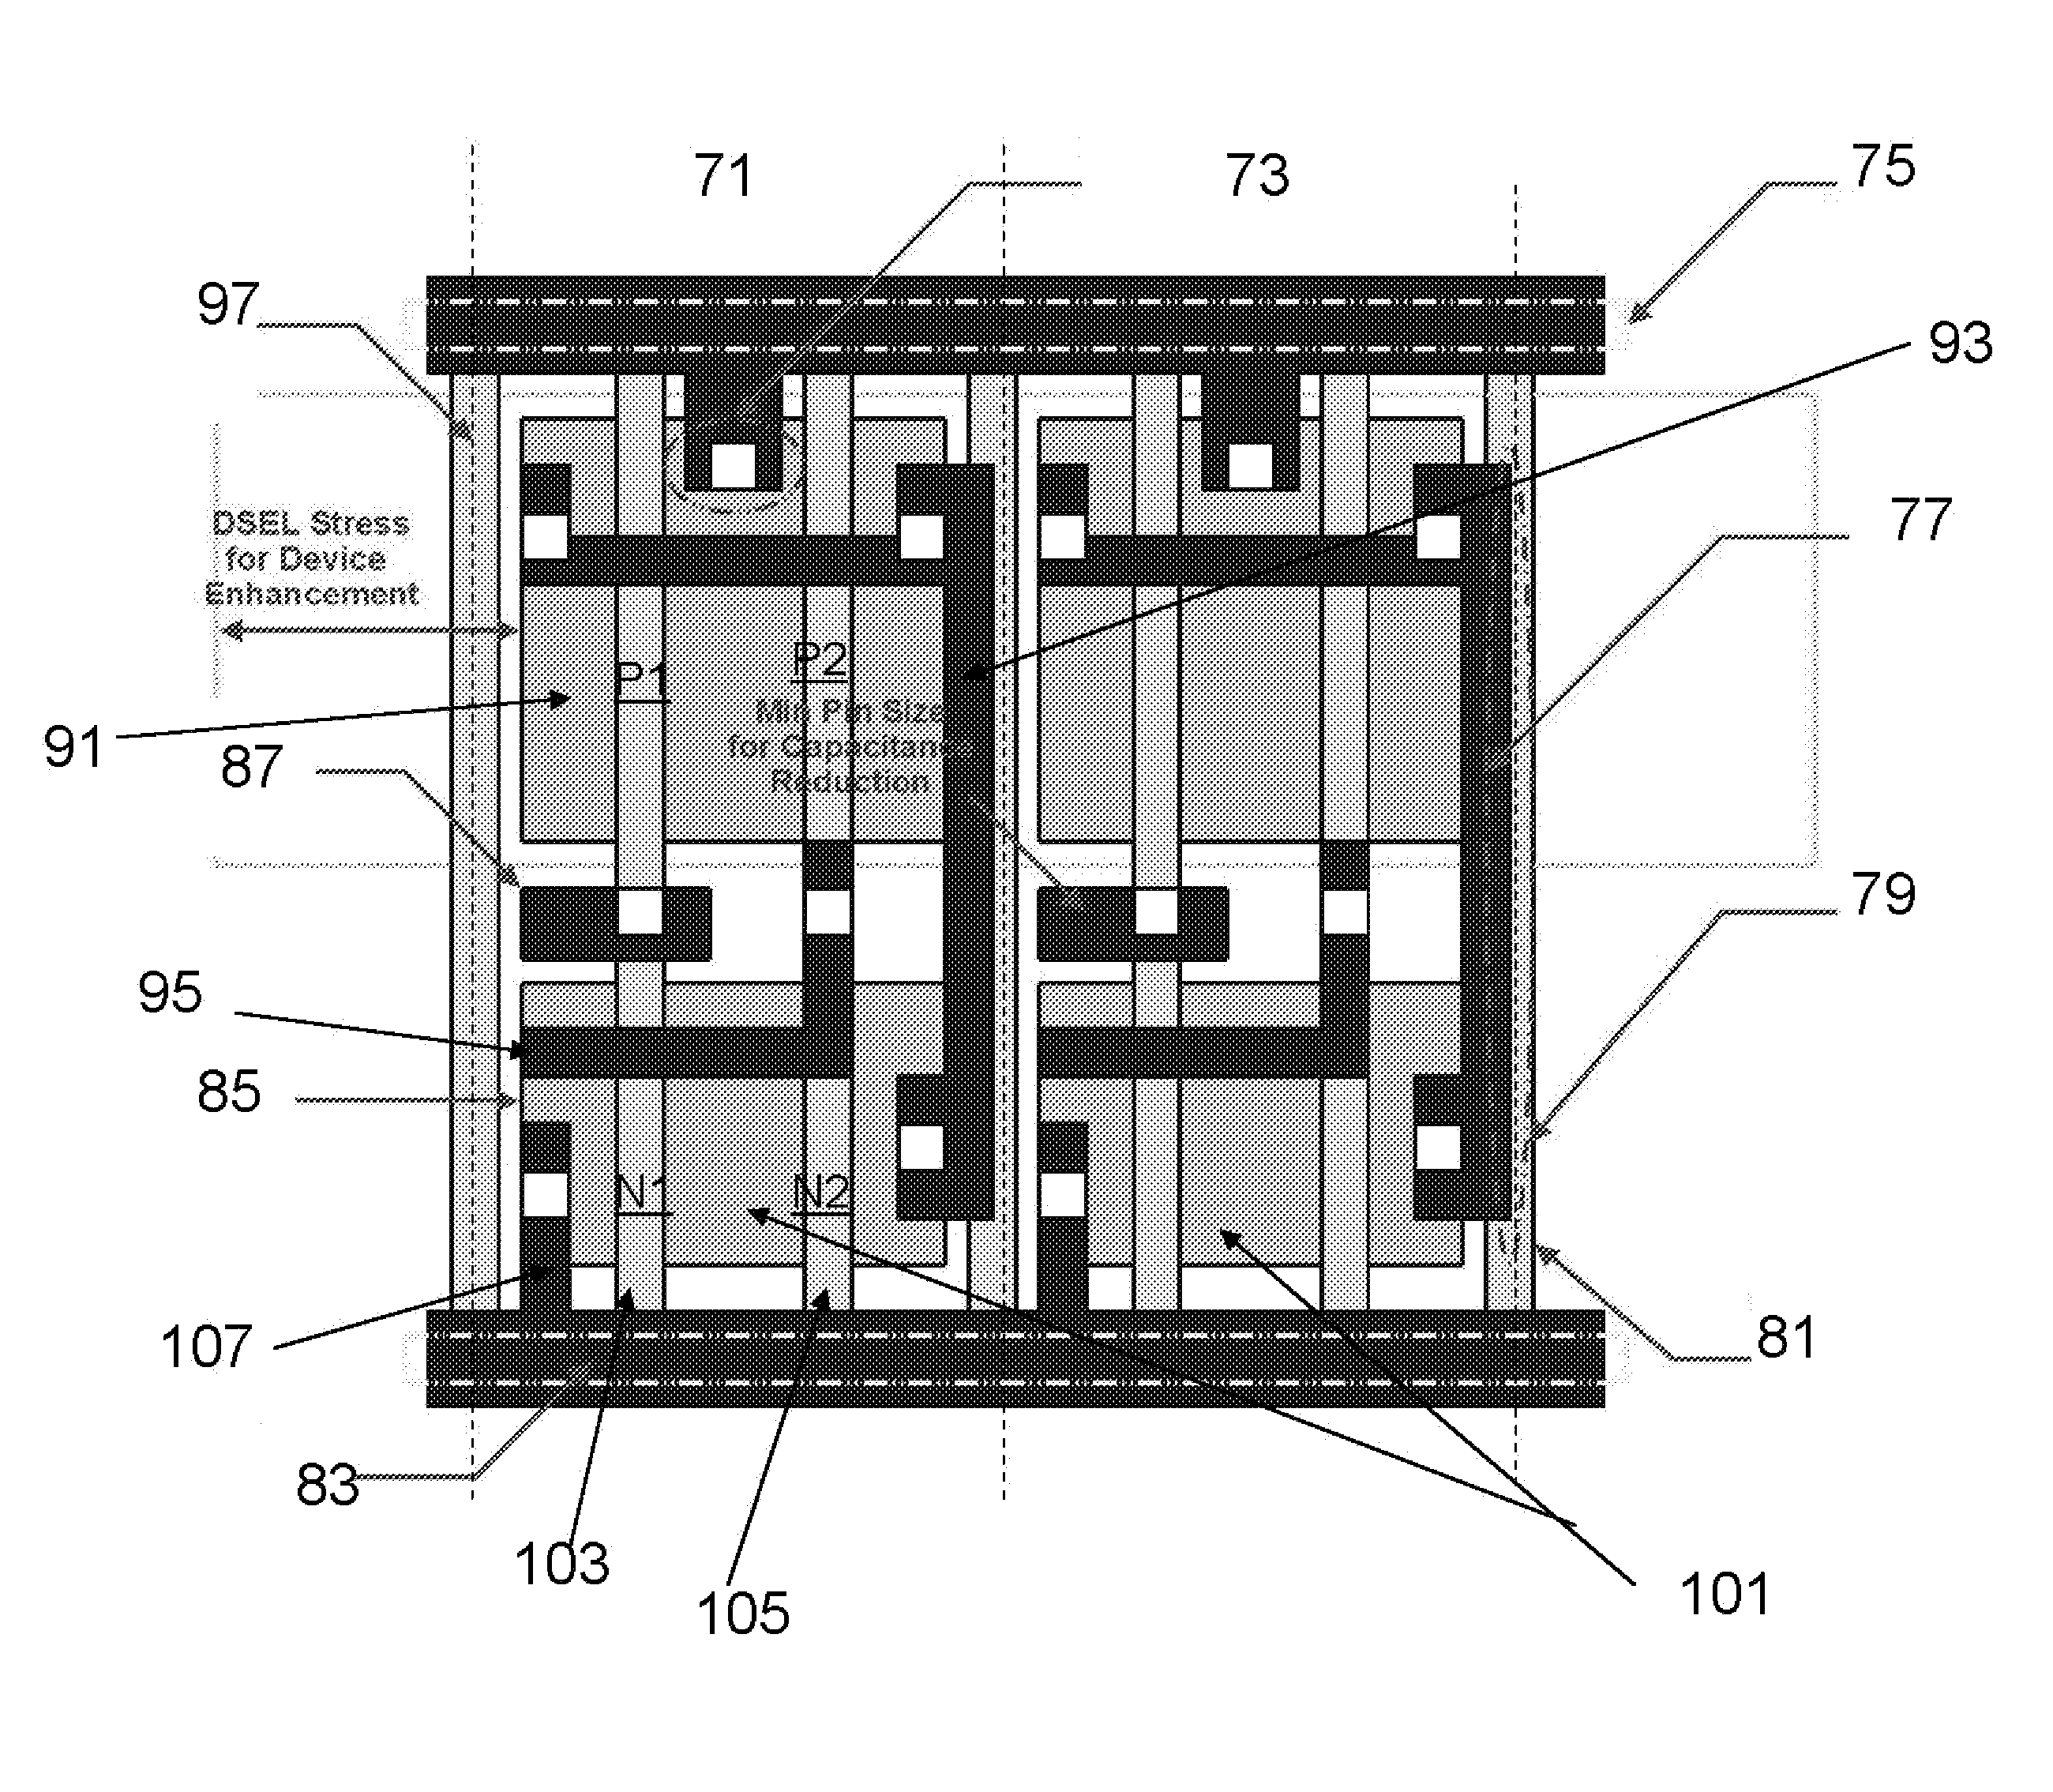 Standard Cell Architecture and Methods with Variable Design Rules